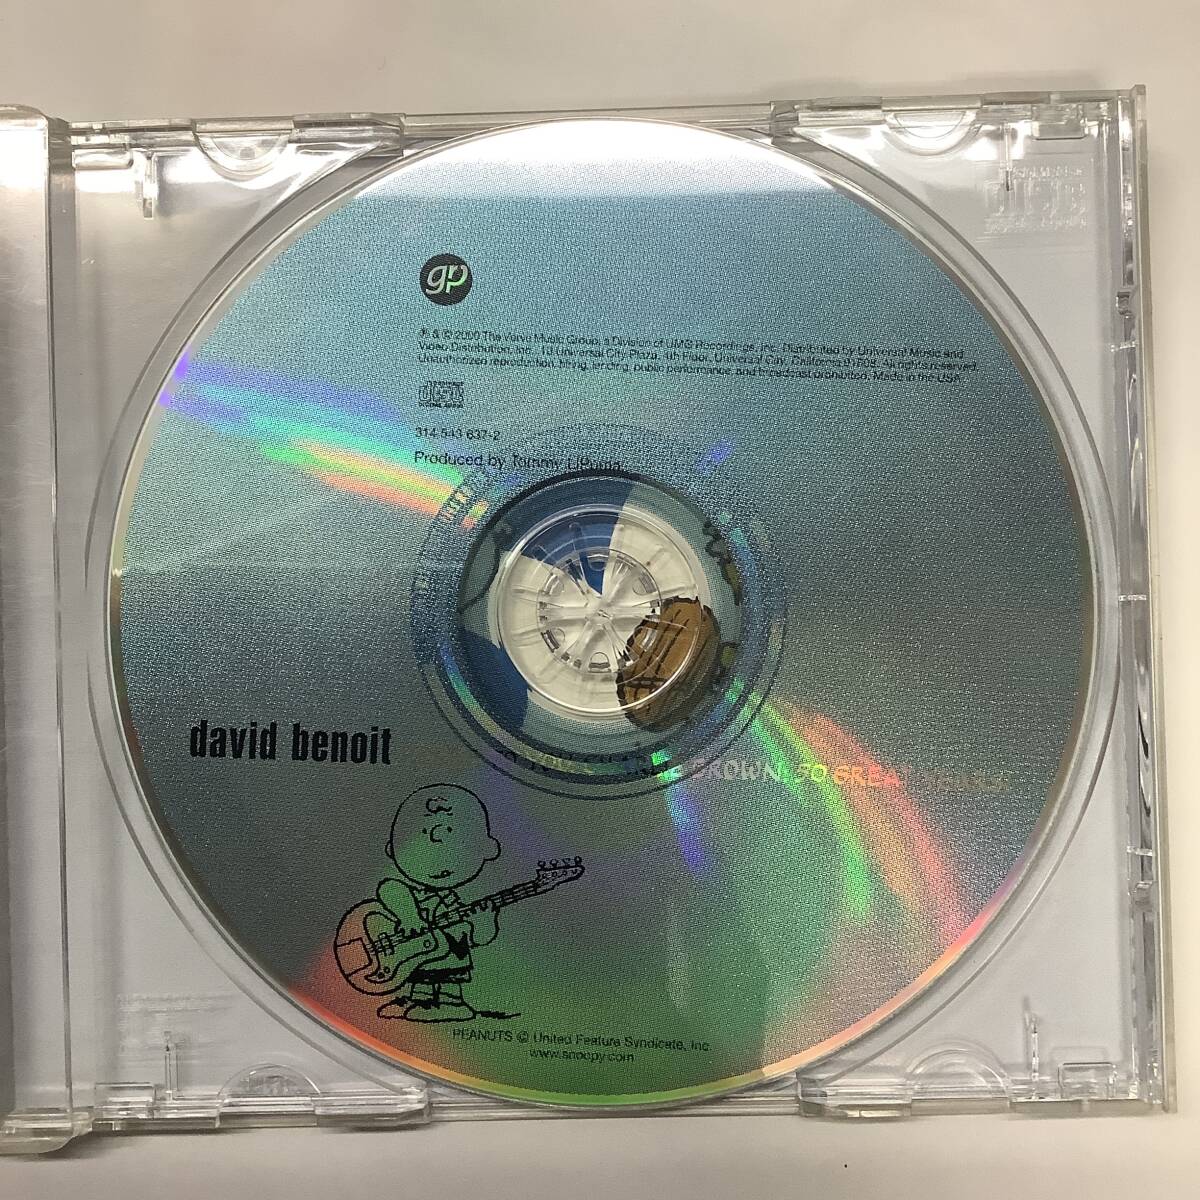 DavidBenoit Here’s to You Charlie Brown 50 Great Years 輸入盤CD 314543637-2 デイヴィッド ベノワ_画像5